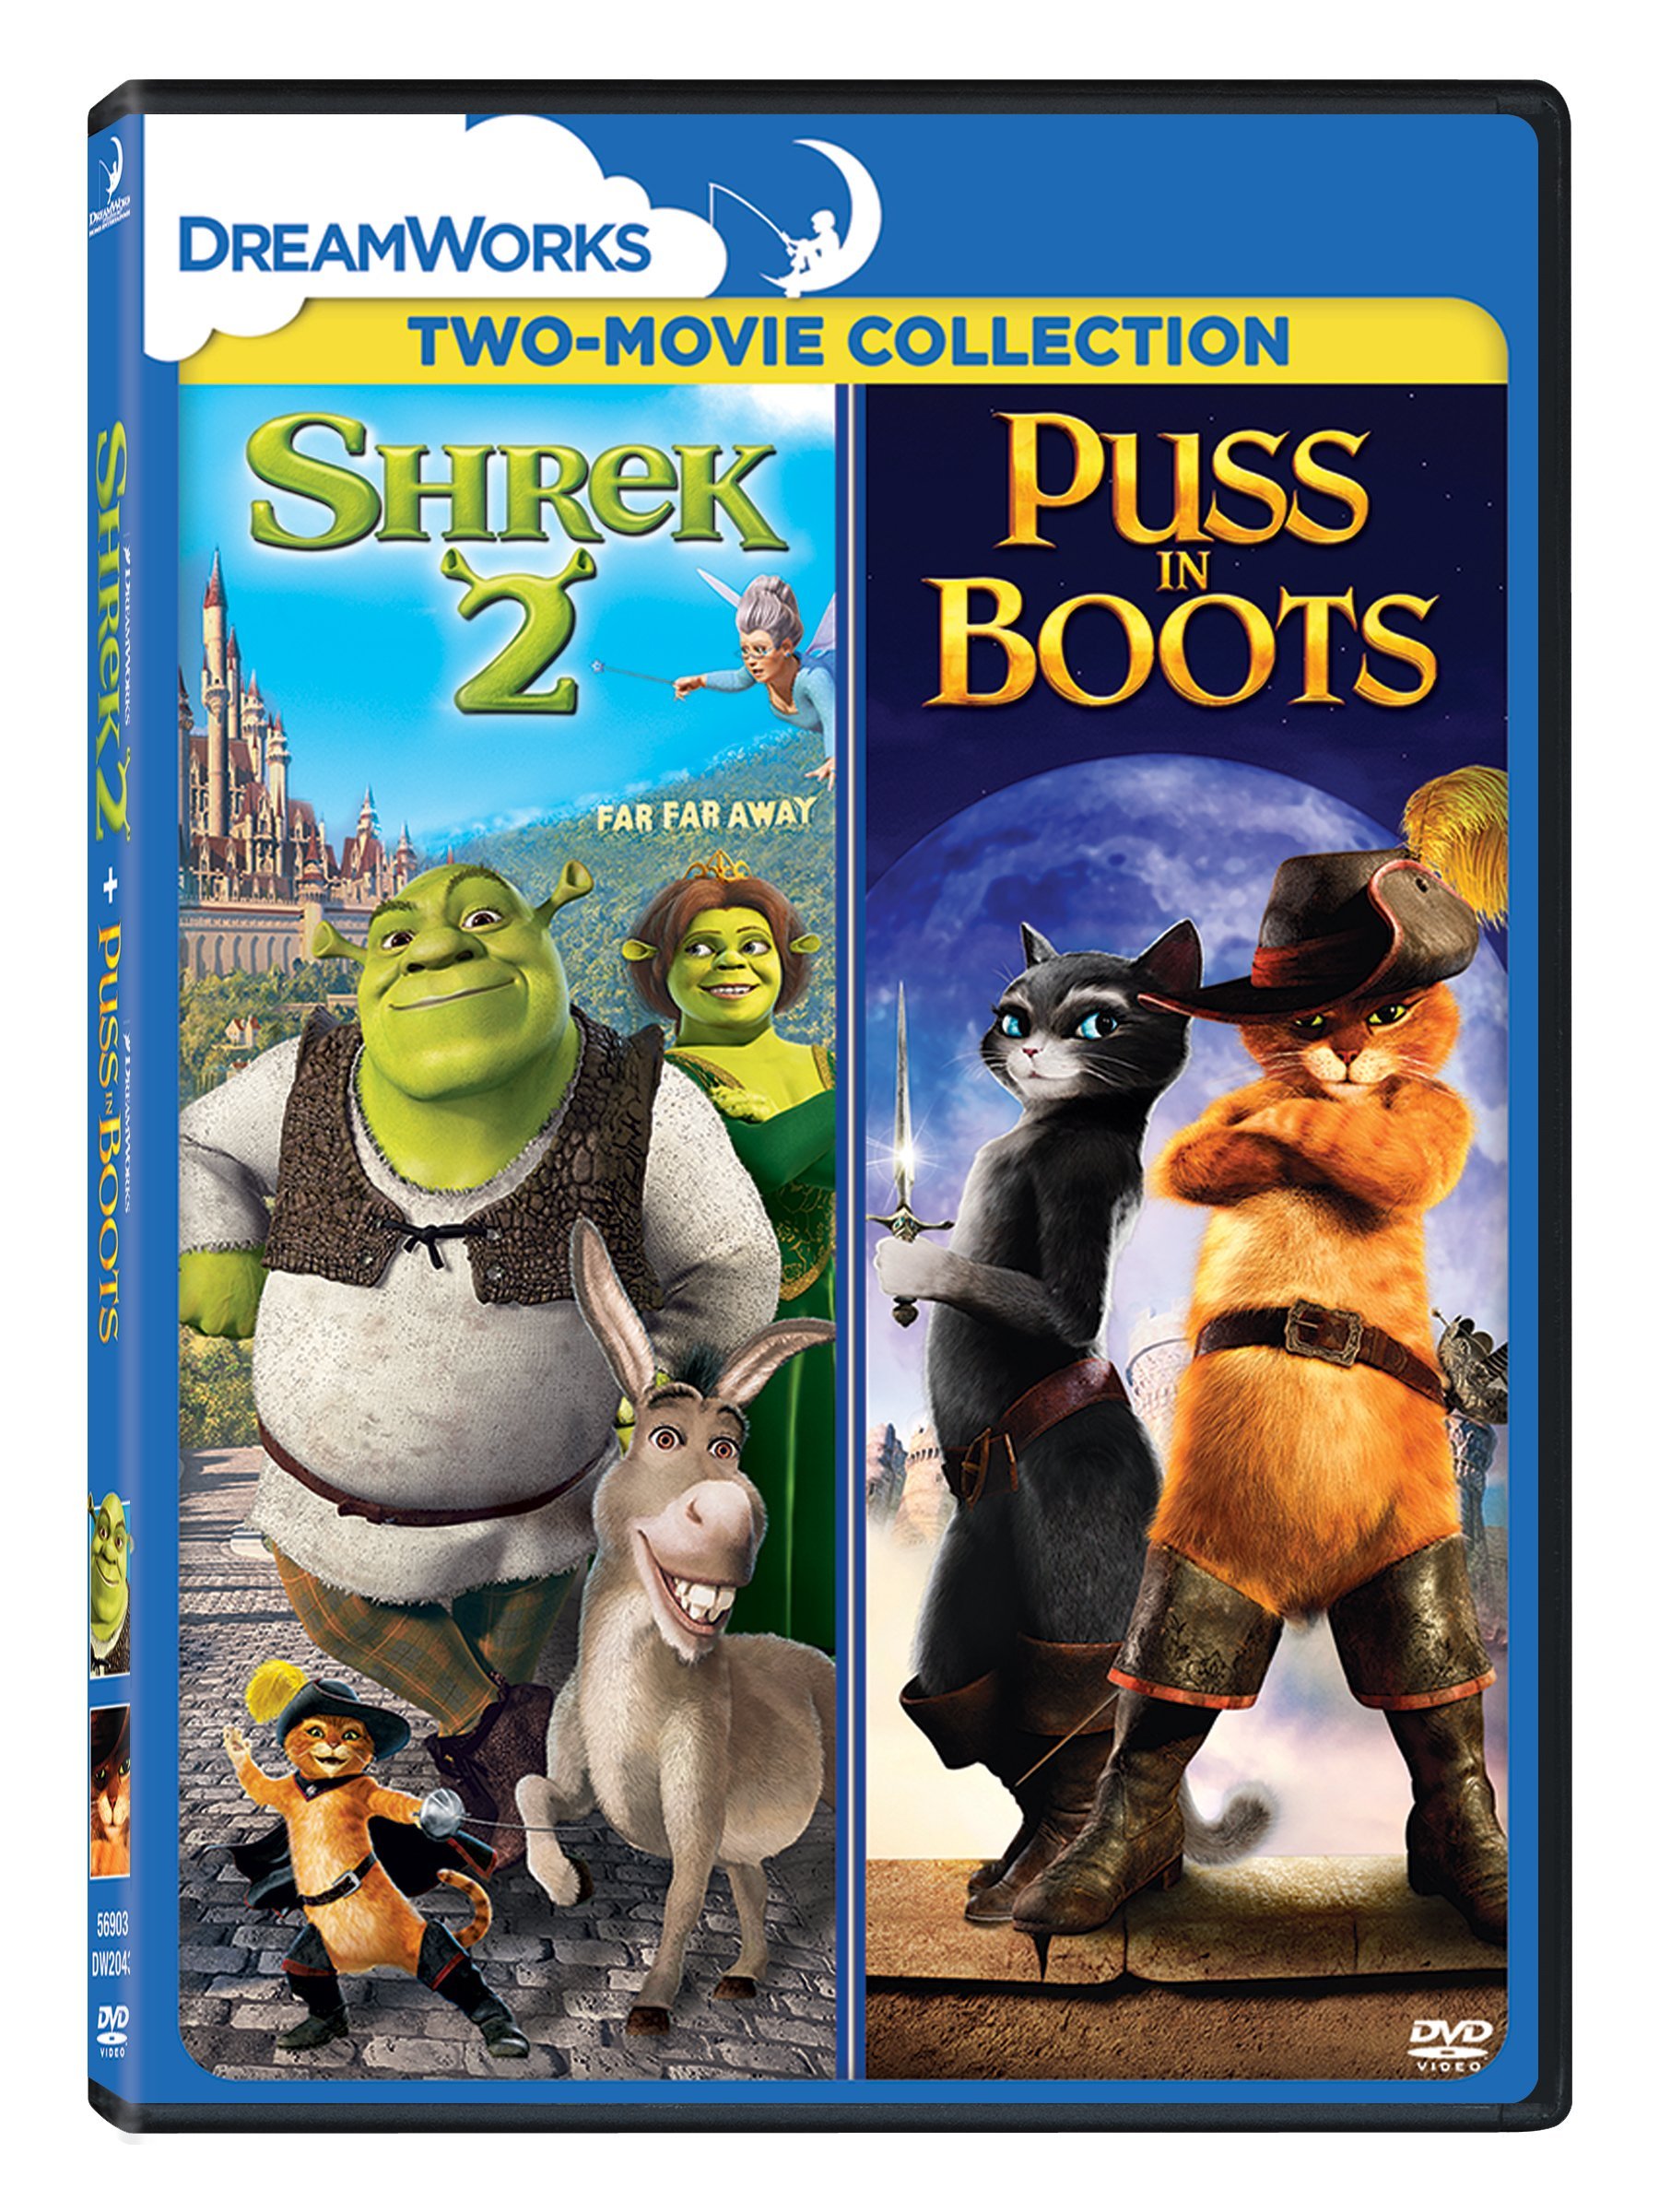 shrek-2-puss-in-boots-movie-purchase-or-watch-online